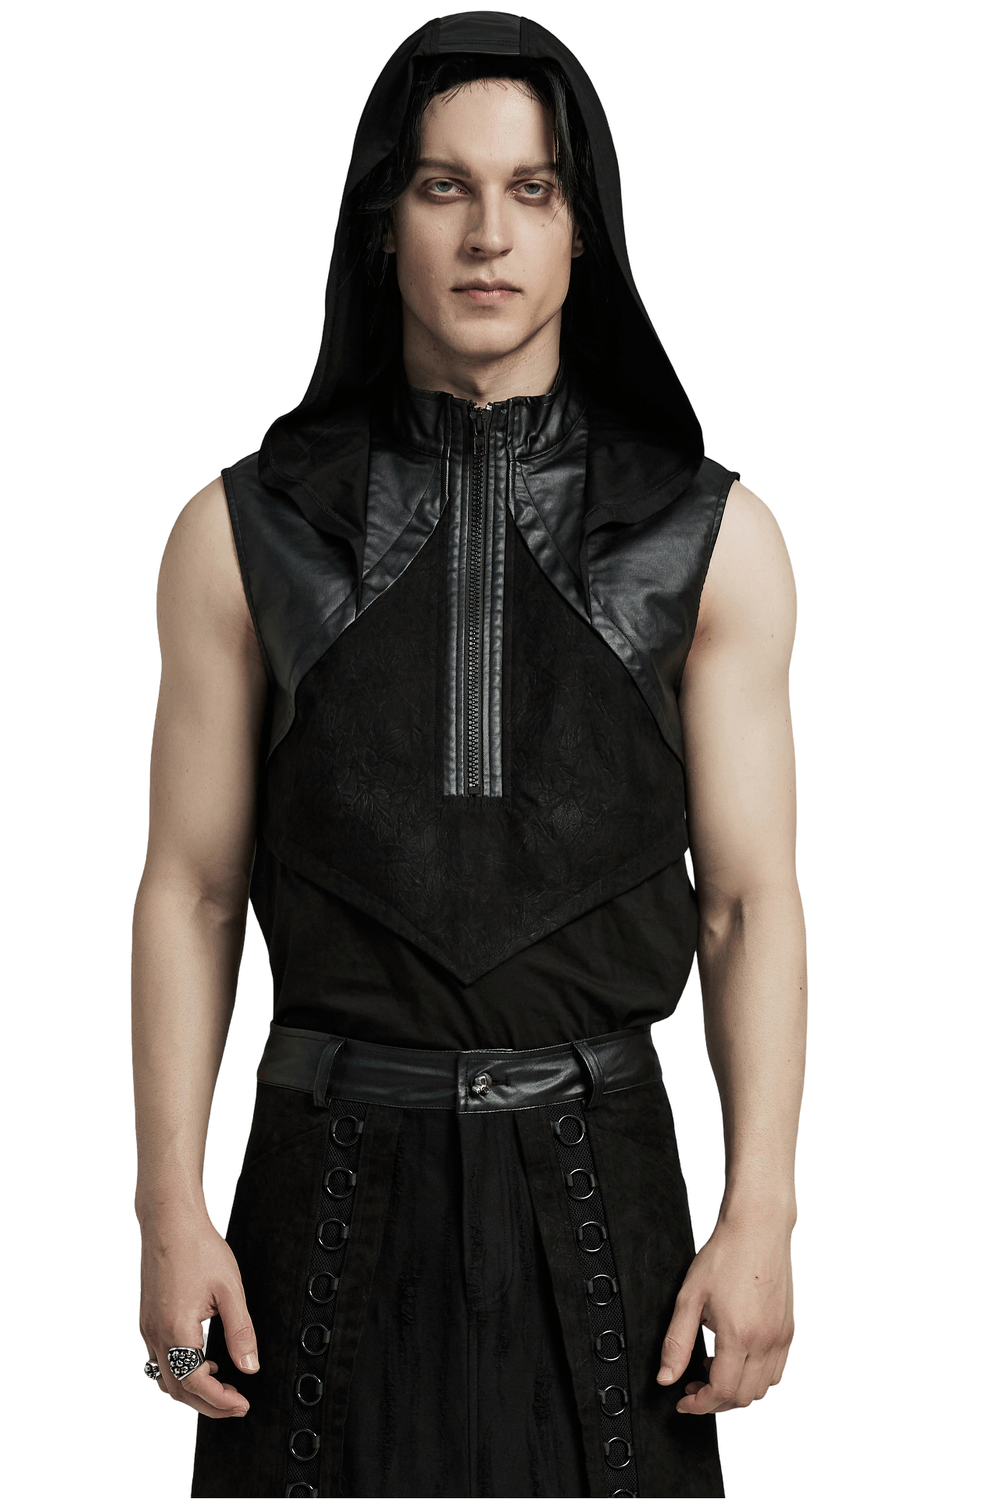 Black Edgy Male Sleeveless Hooded Top with Zipper